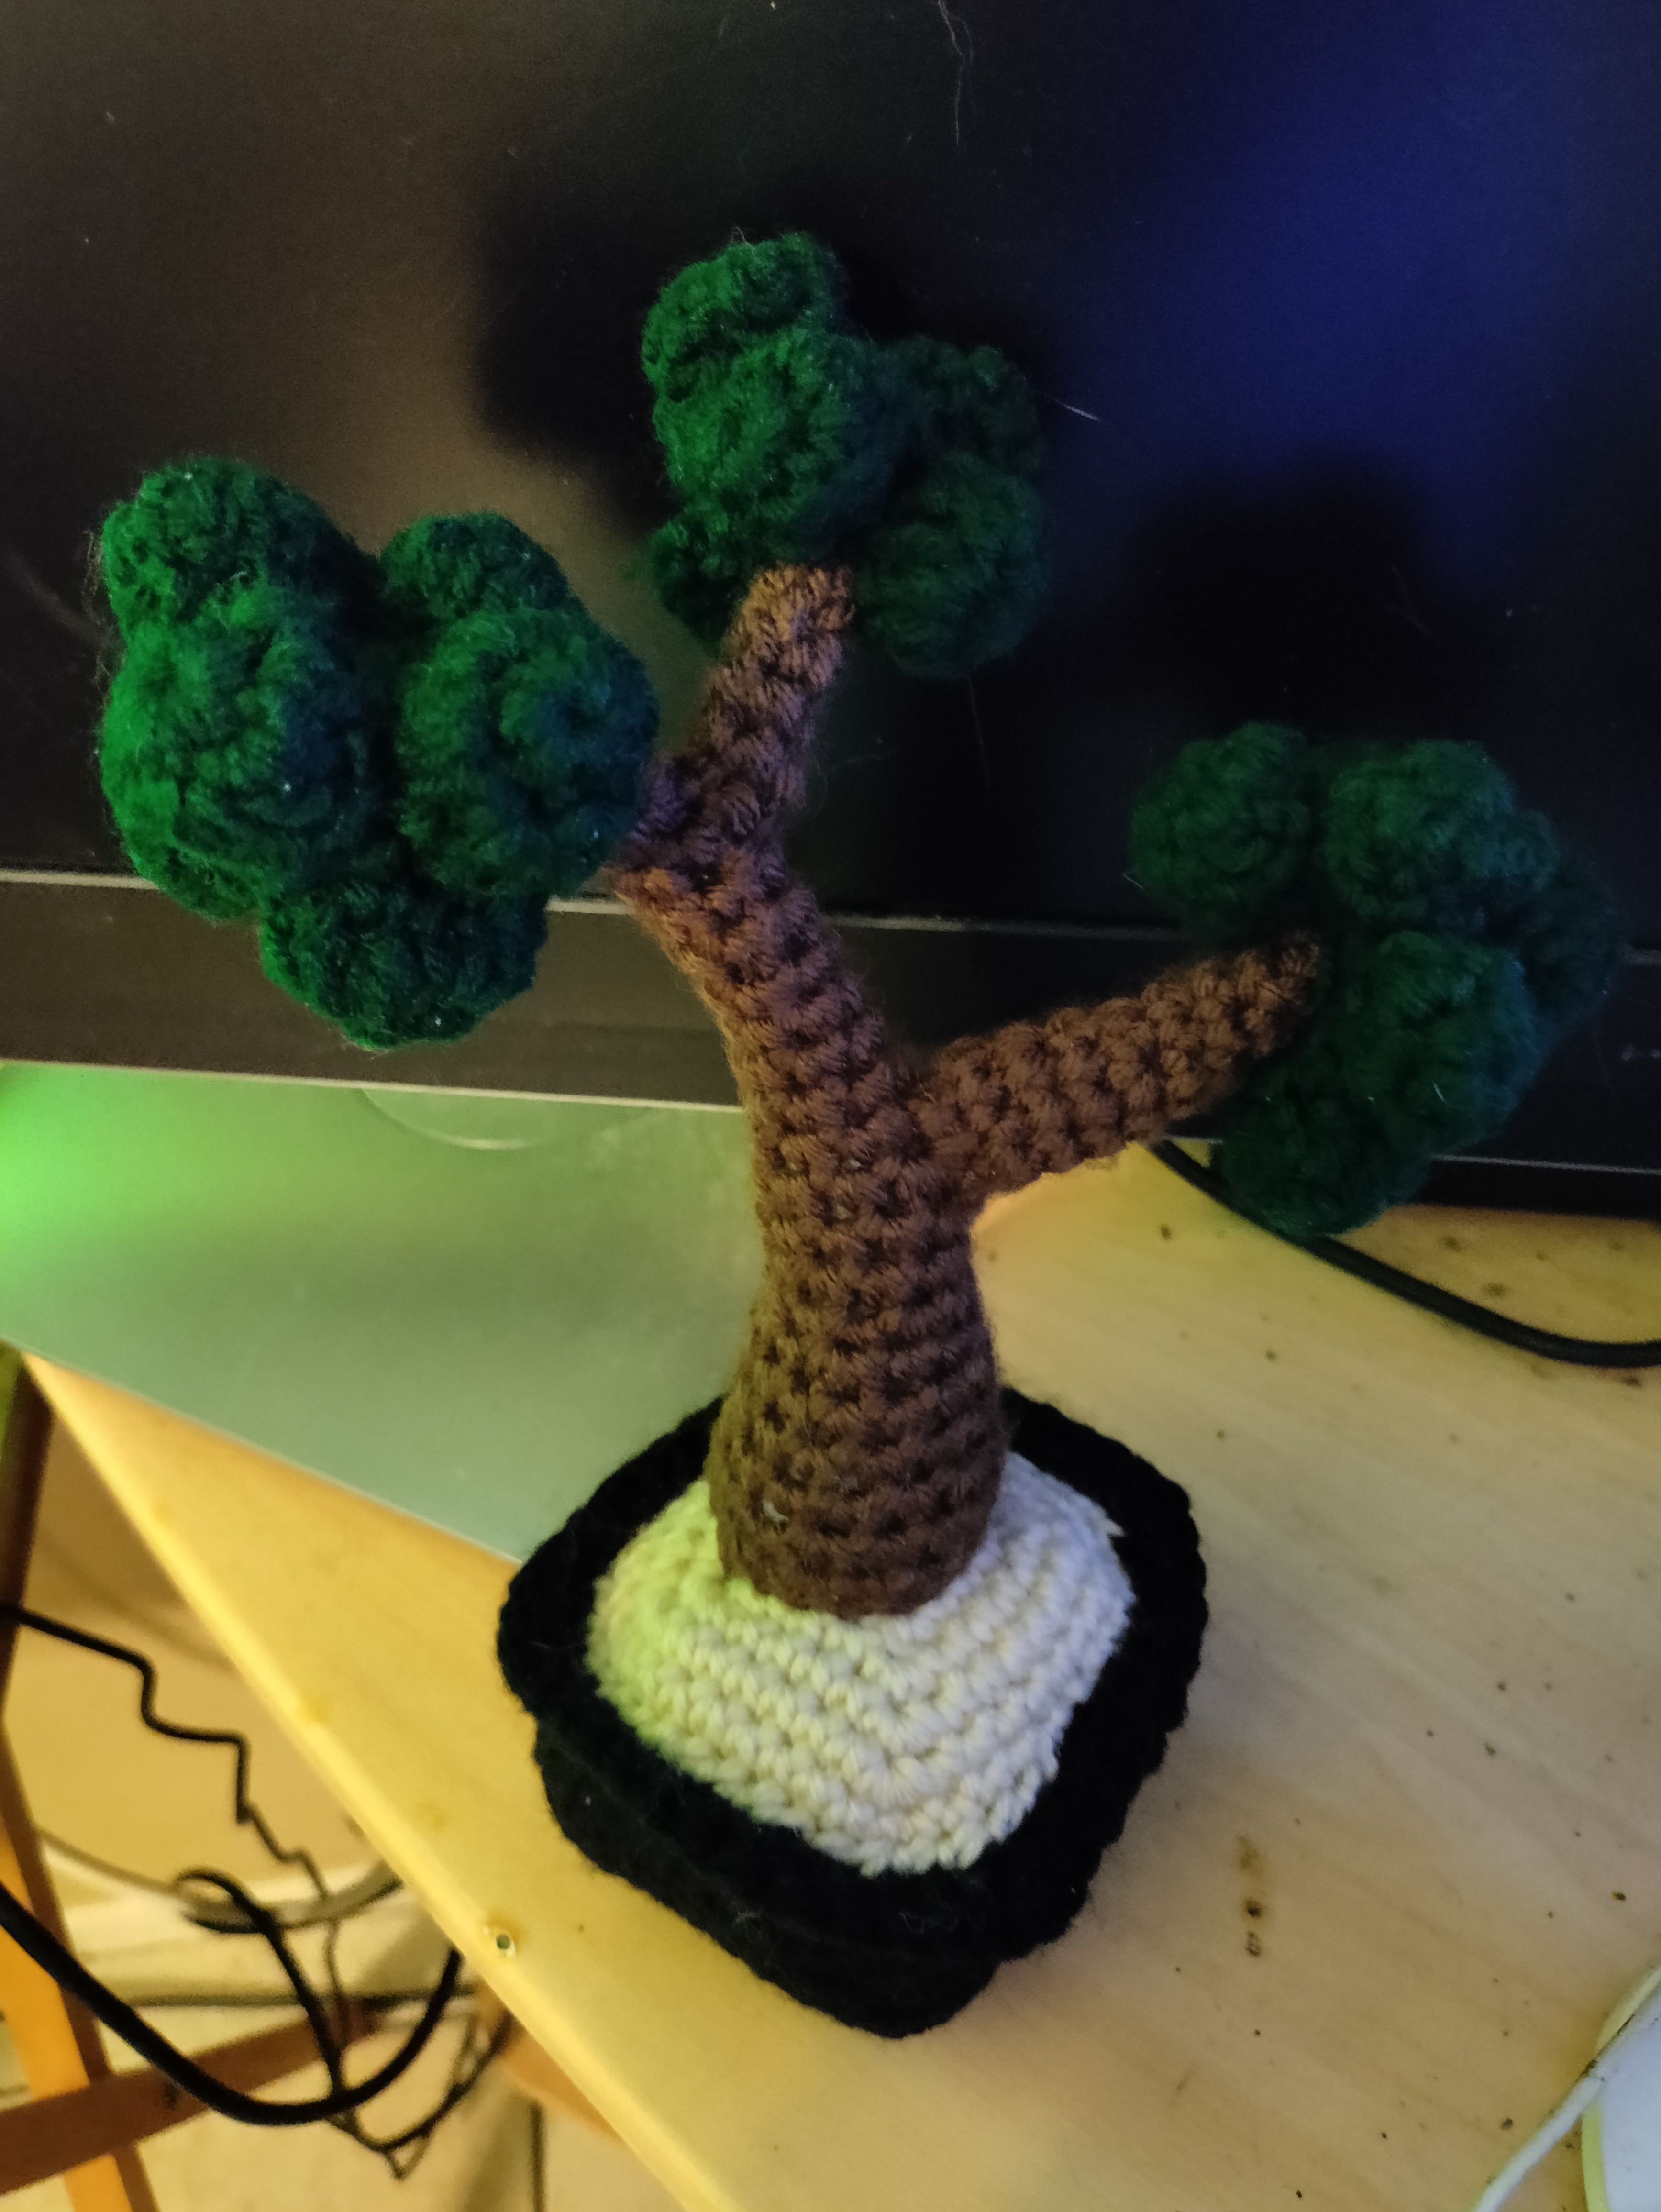 a crocheted bonsai tree in a crocheted black pot leaning against a monitor screen